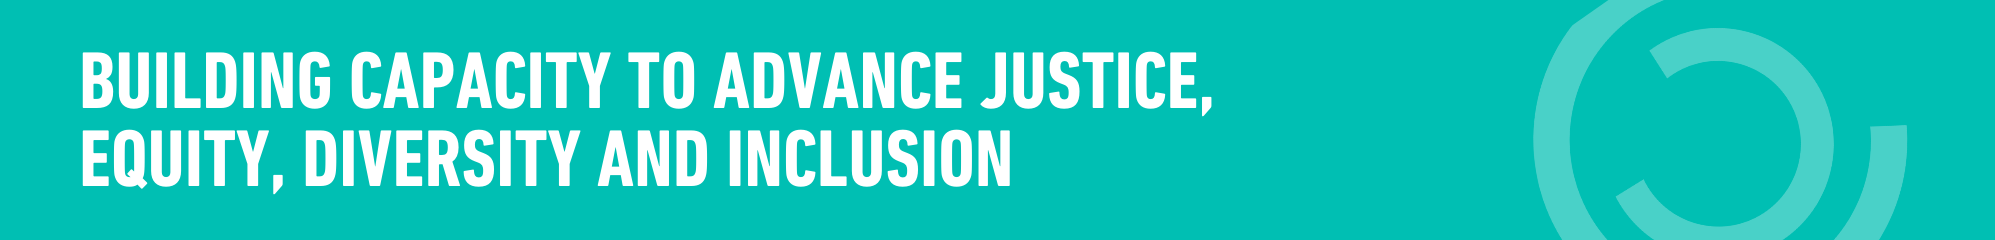 Teal background with circle motif and text "Building capacity to advance justice, equity, diversity and inclusion"